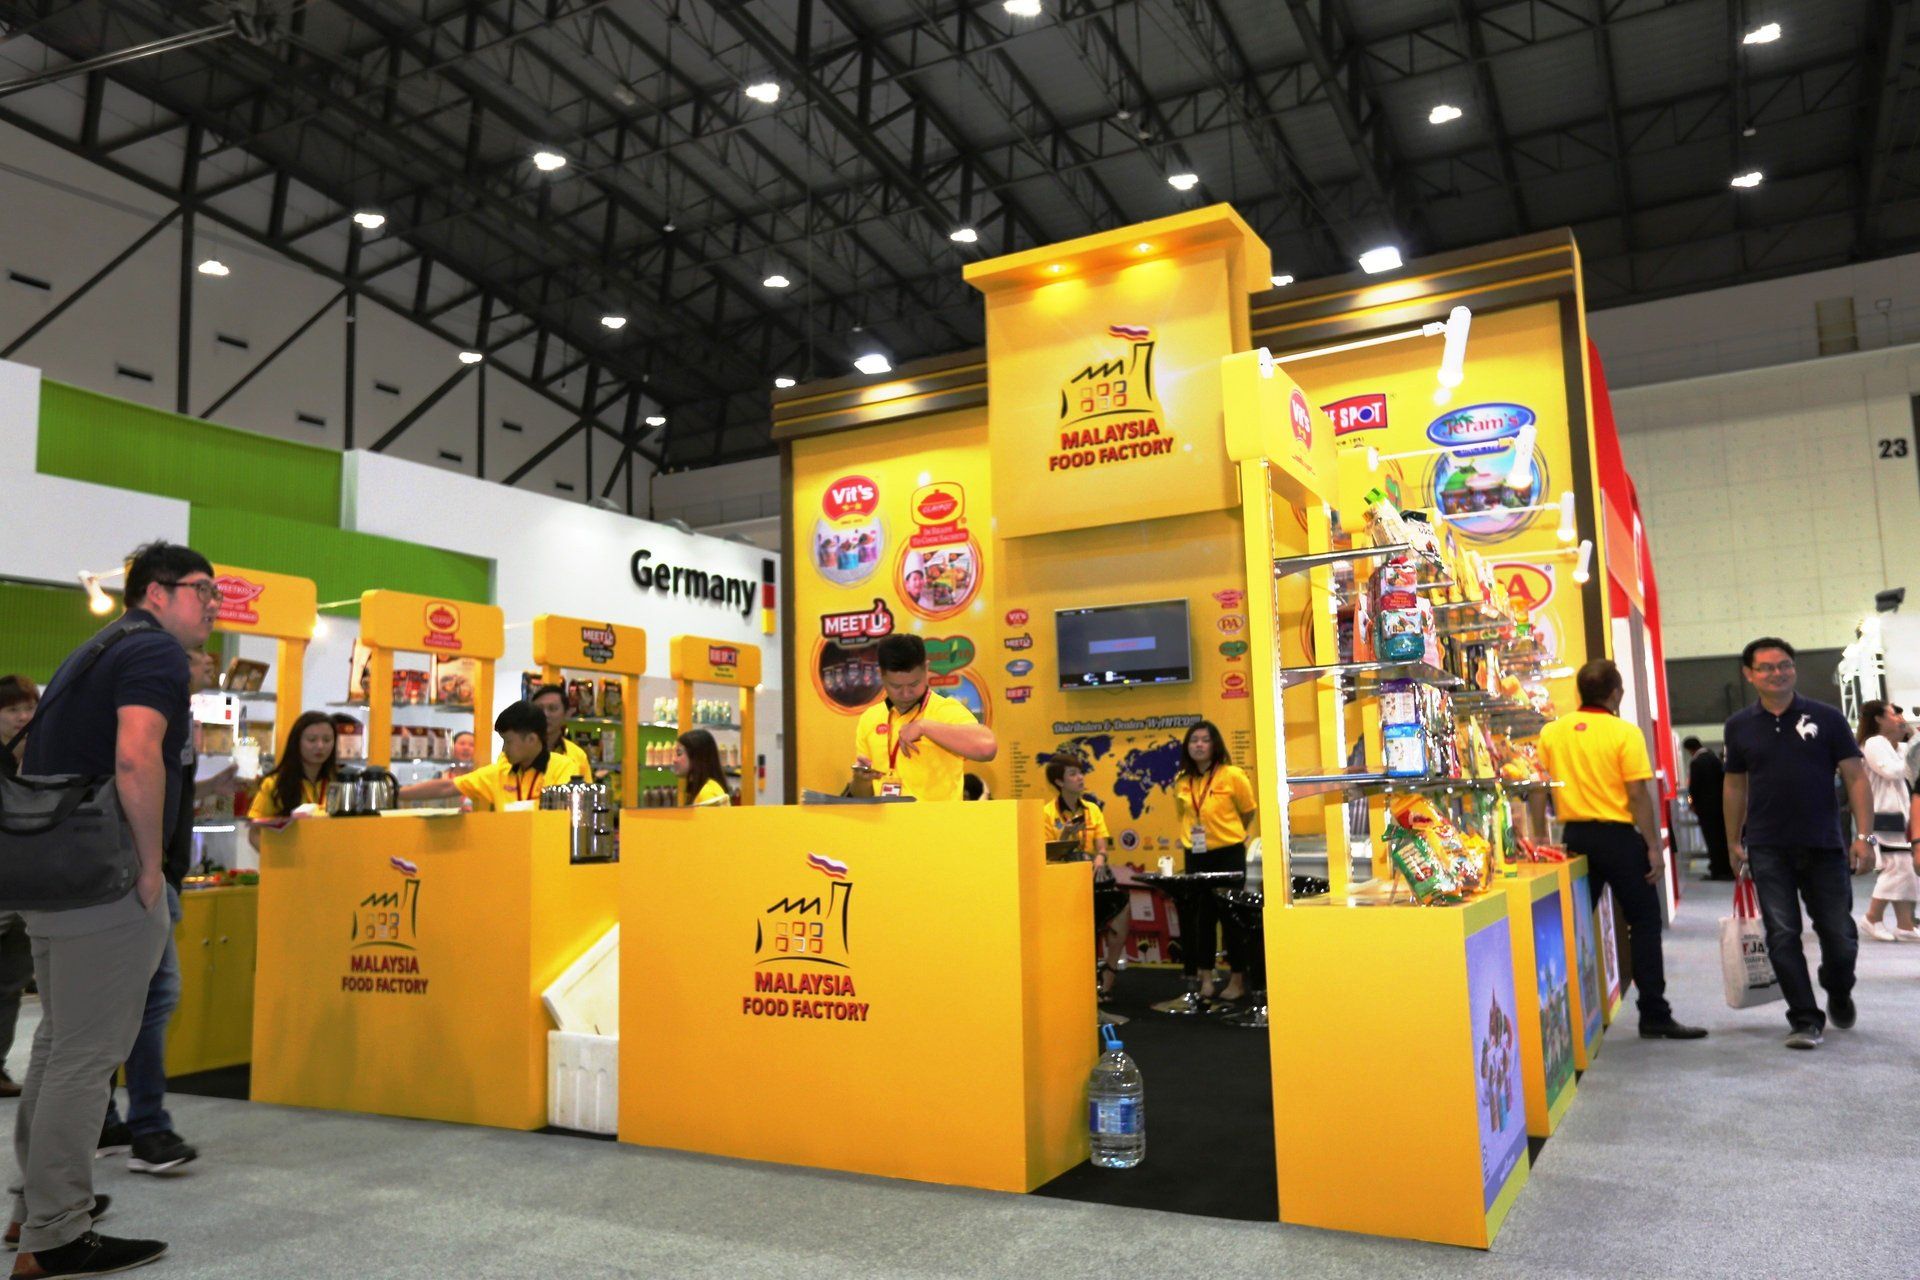 Malaysia Food Factory @ Thaifex 2017. Booth designed and built by Essential Global Fairs.